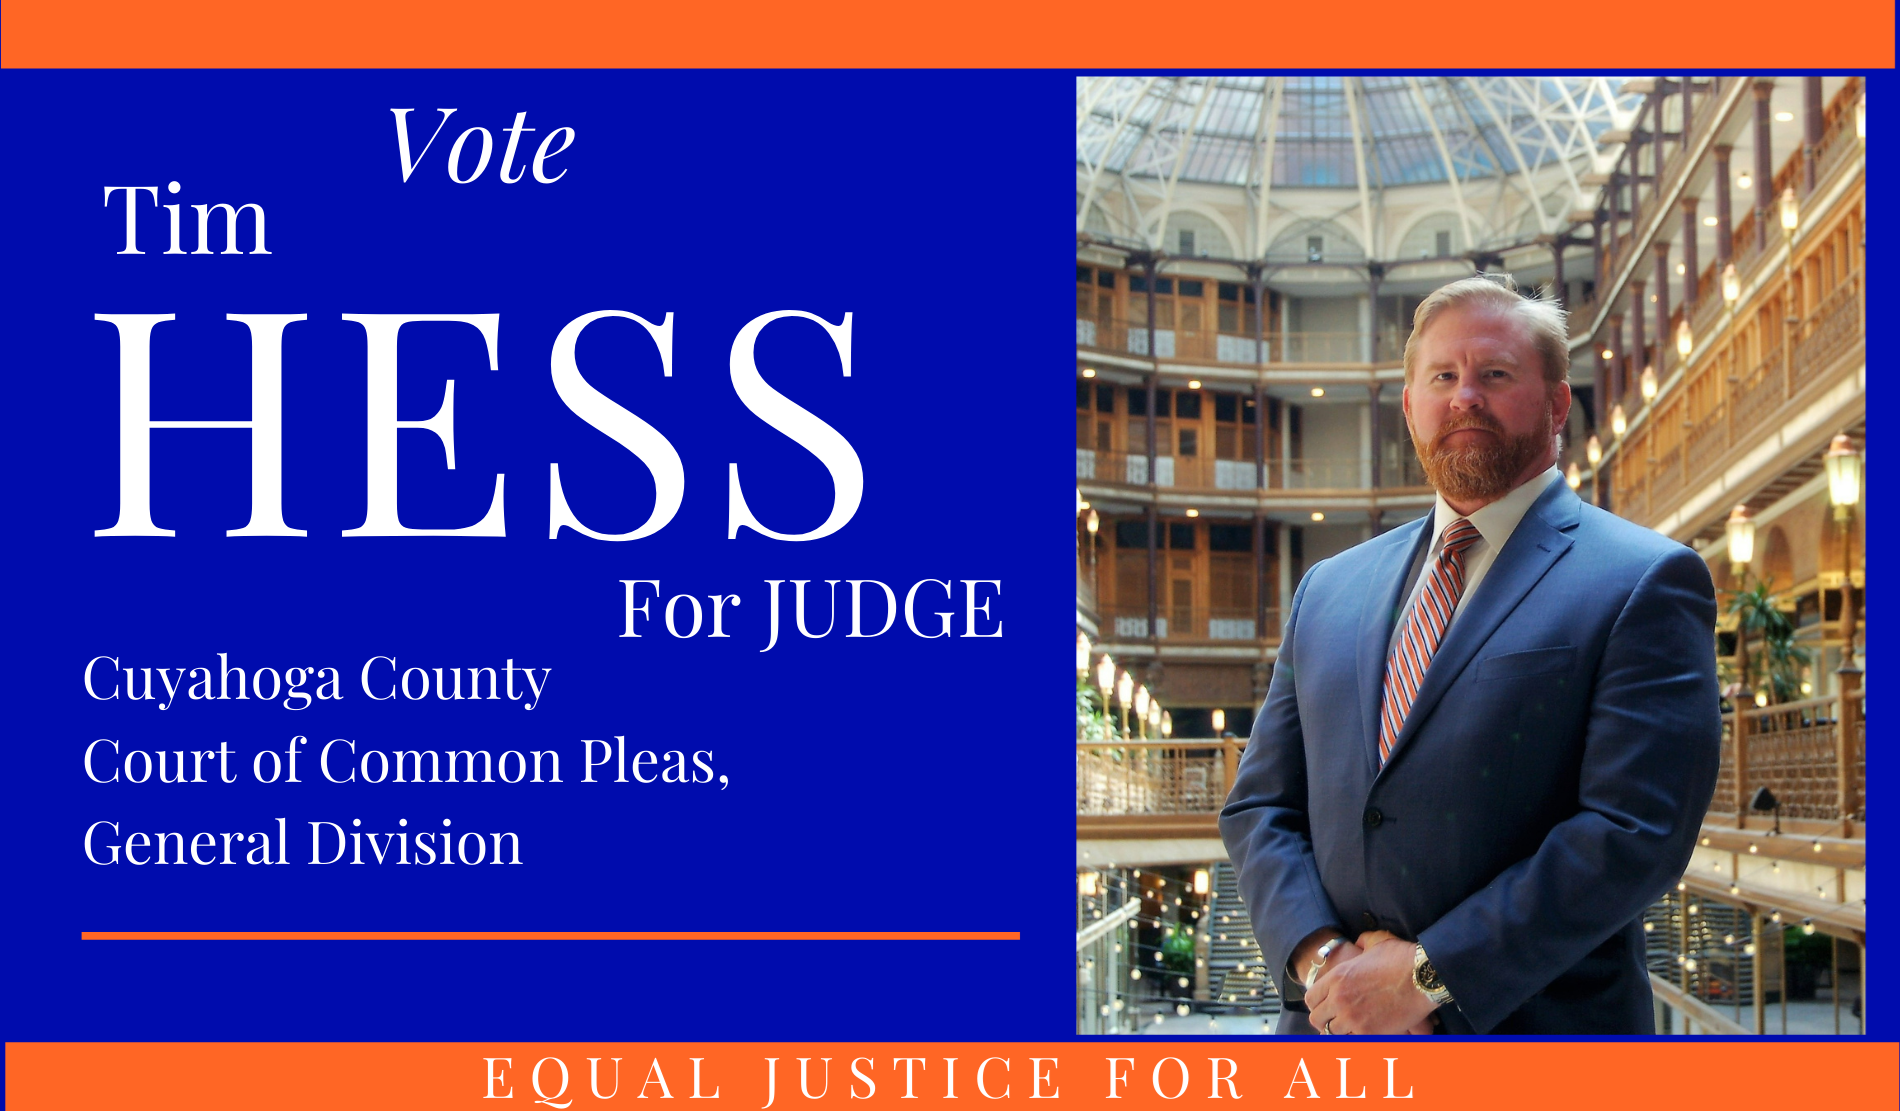 Vote Tim Hess for Judge - Cuyahoga County Court of Common Please, General Division